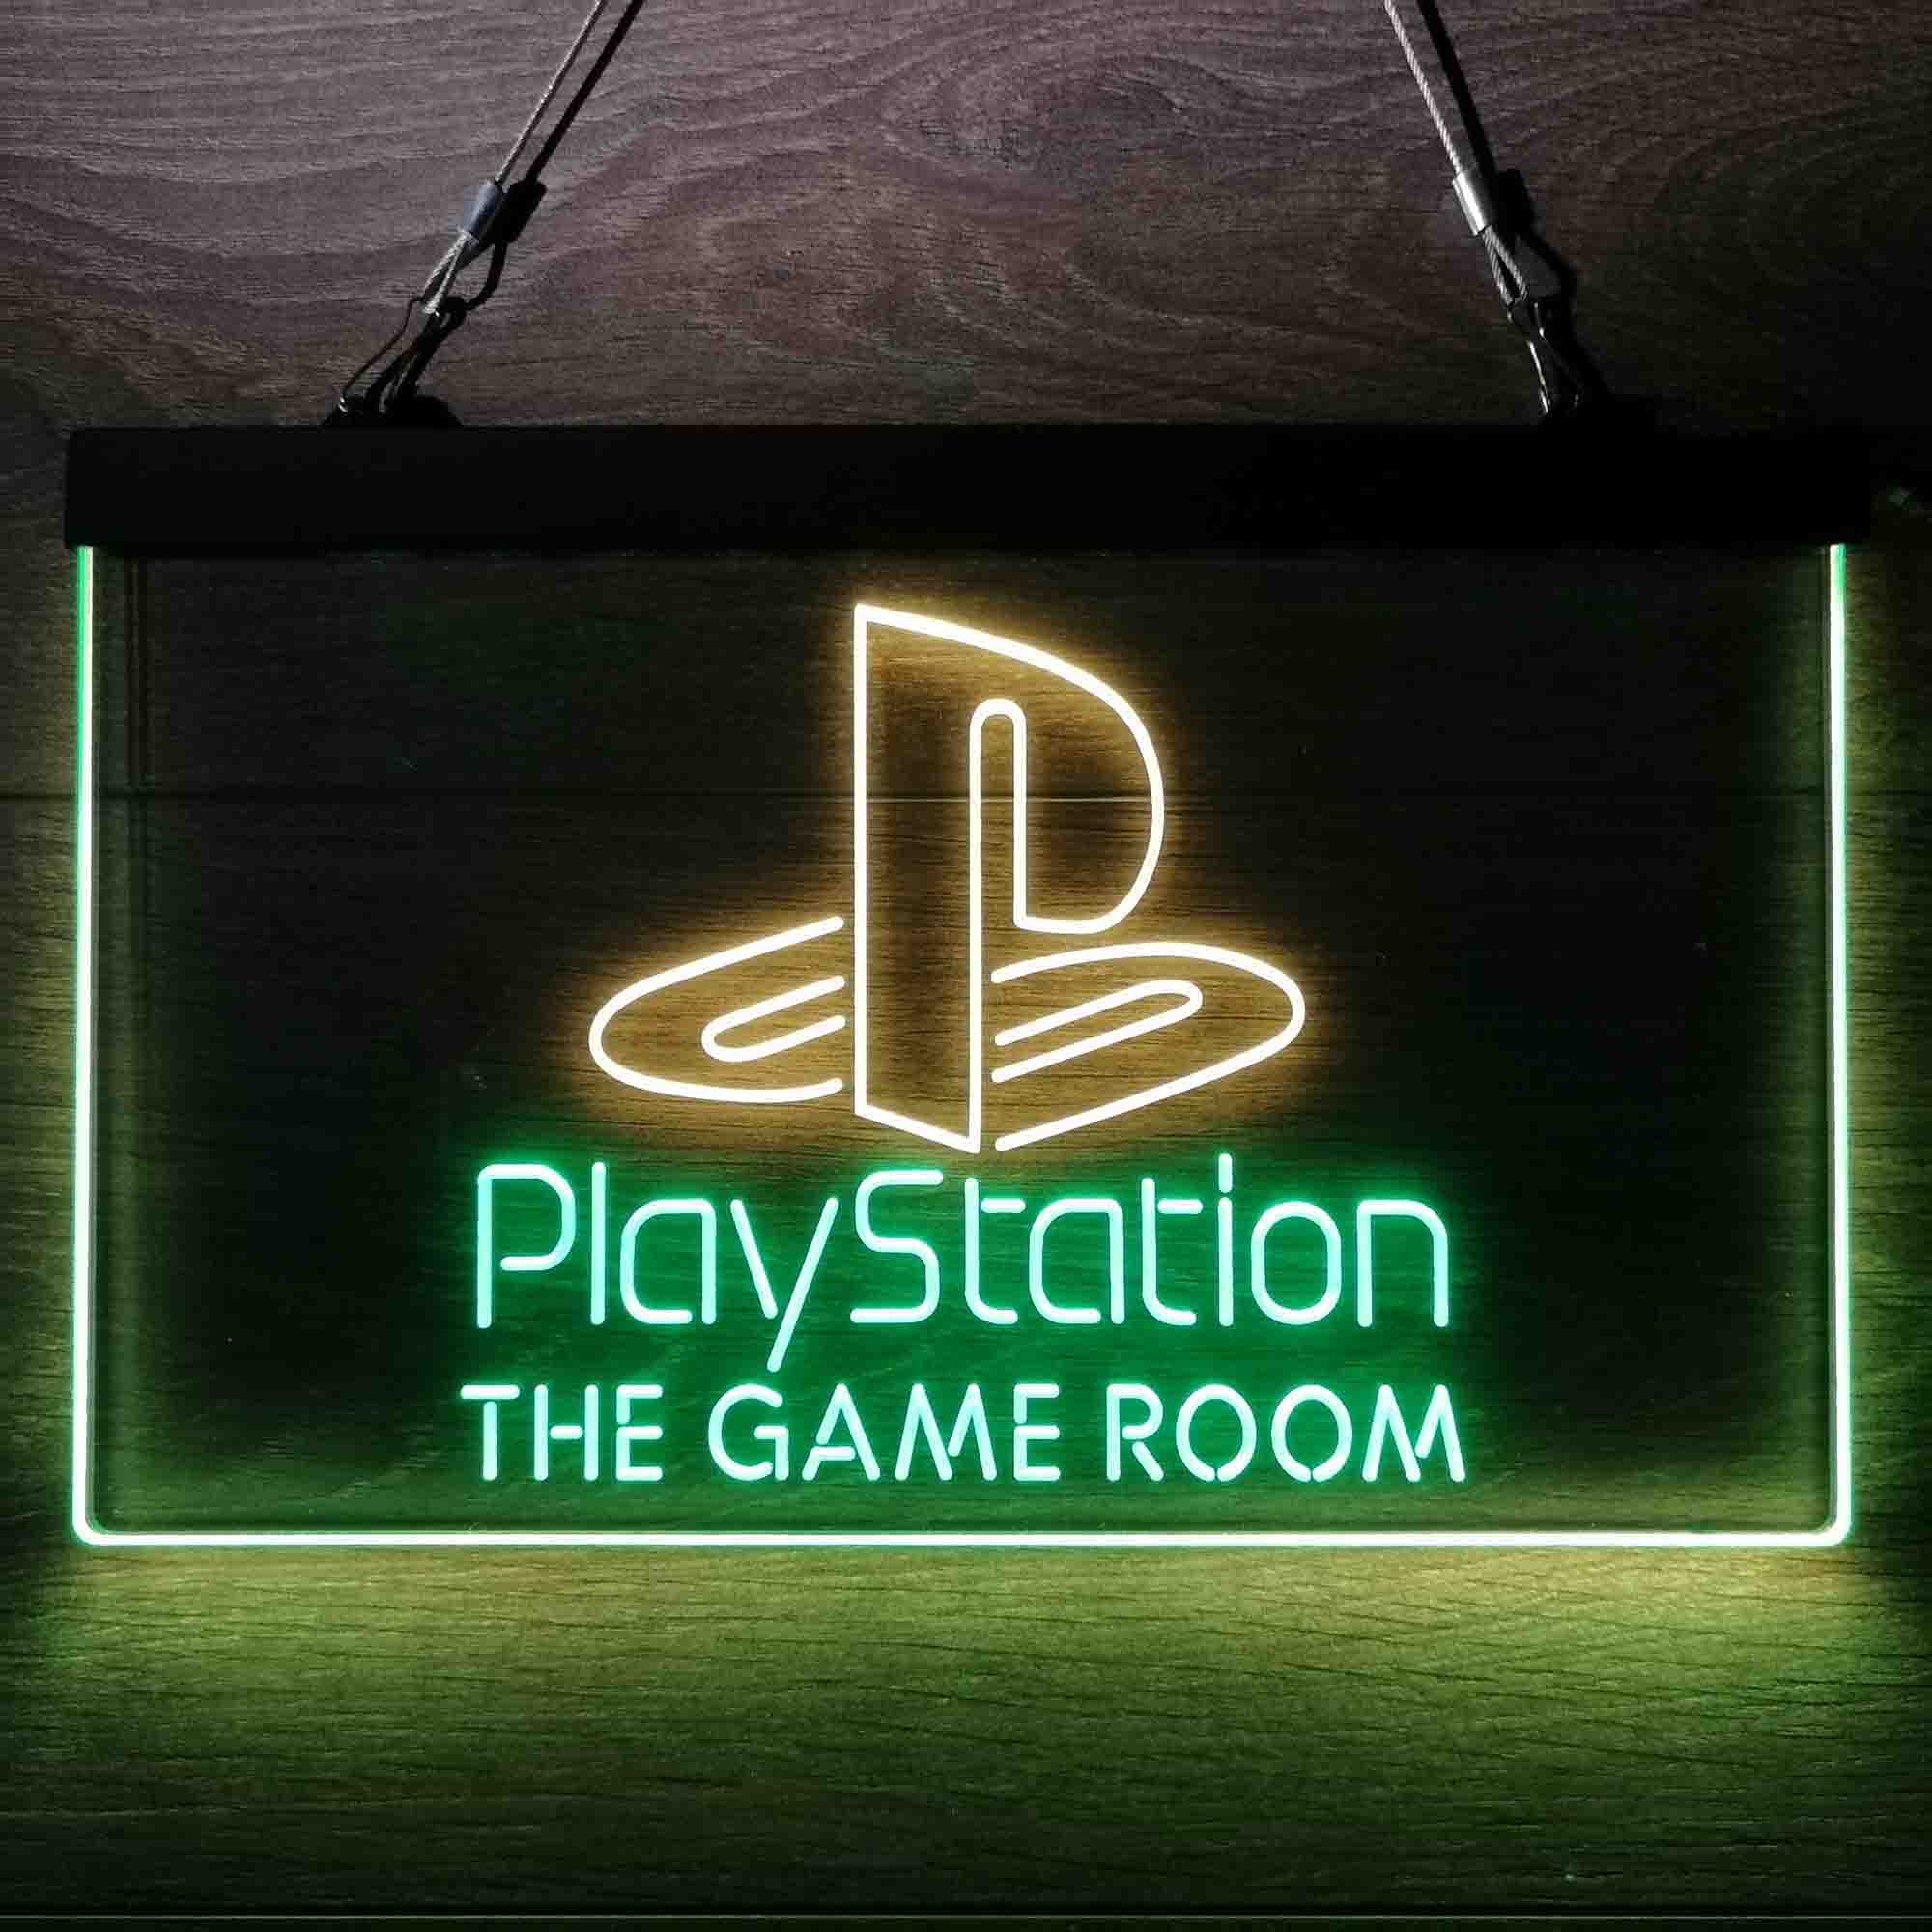 Personalized Playstation Game Room Neon-Like LED Sign Gamer Gift